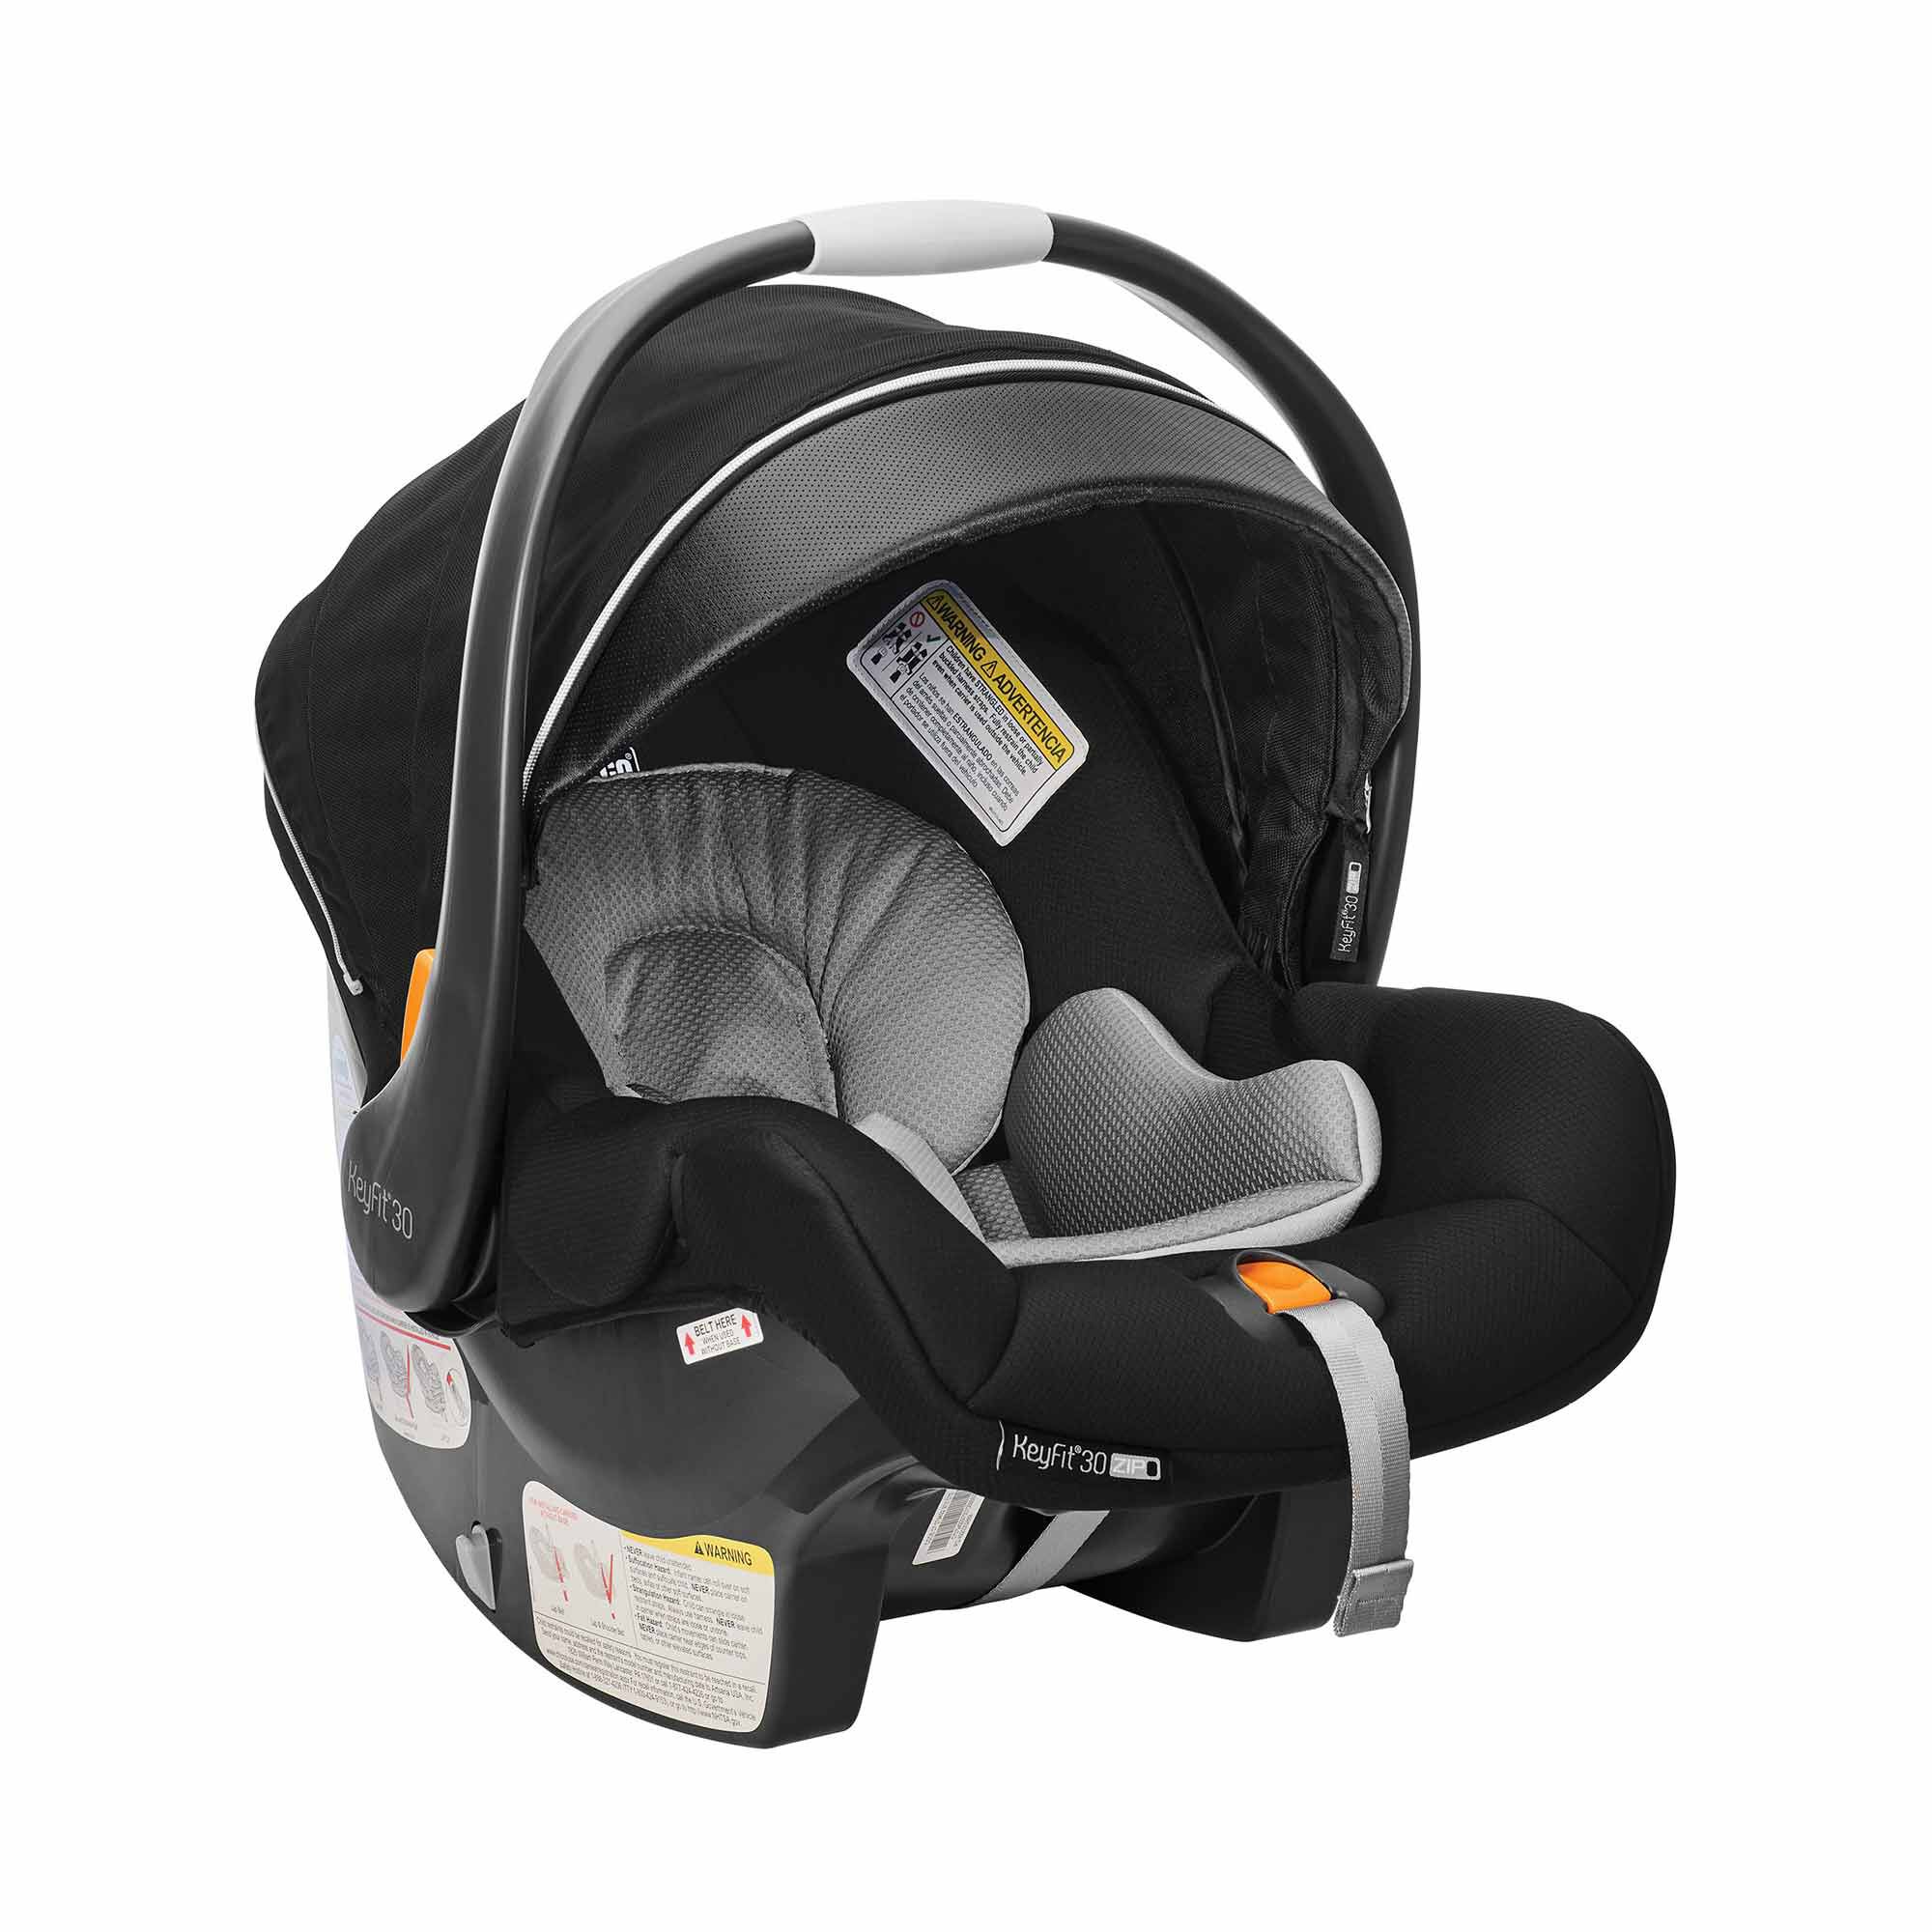 Chicco KeyFit 30 Zip Air Infant Child Safety Car Seat & Base Q Collection 4-30LB 